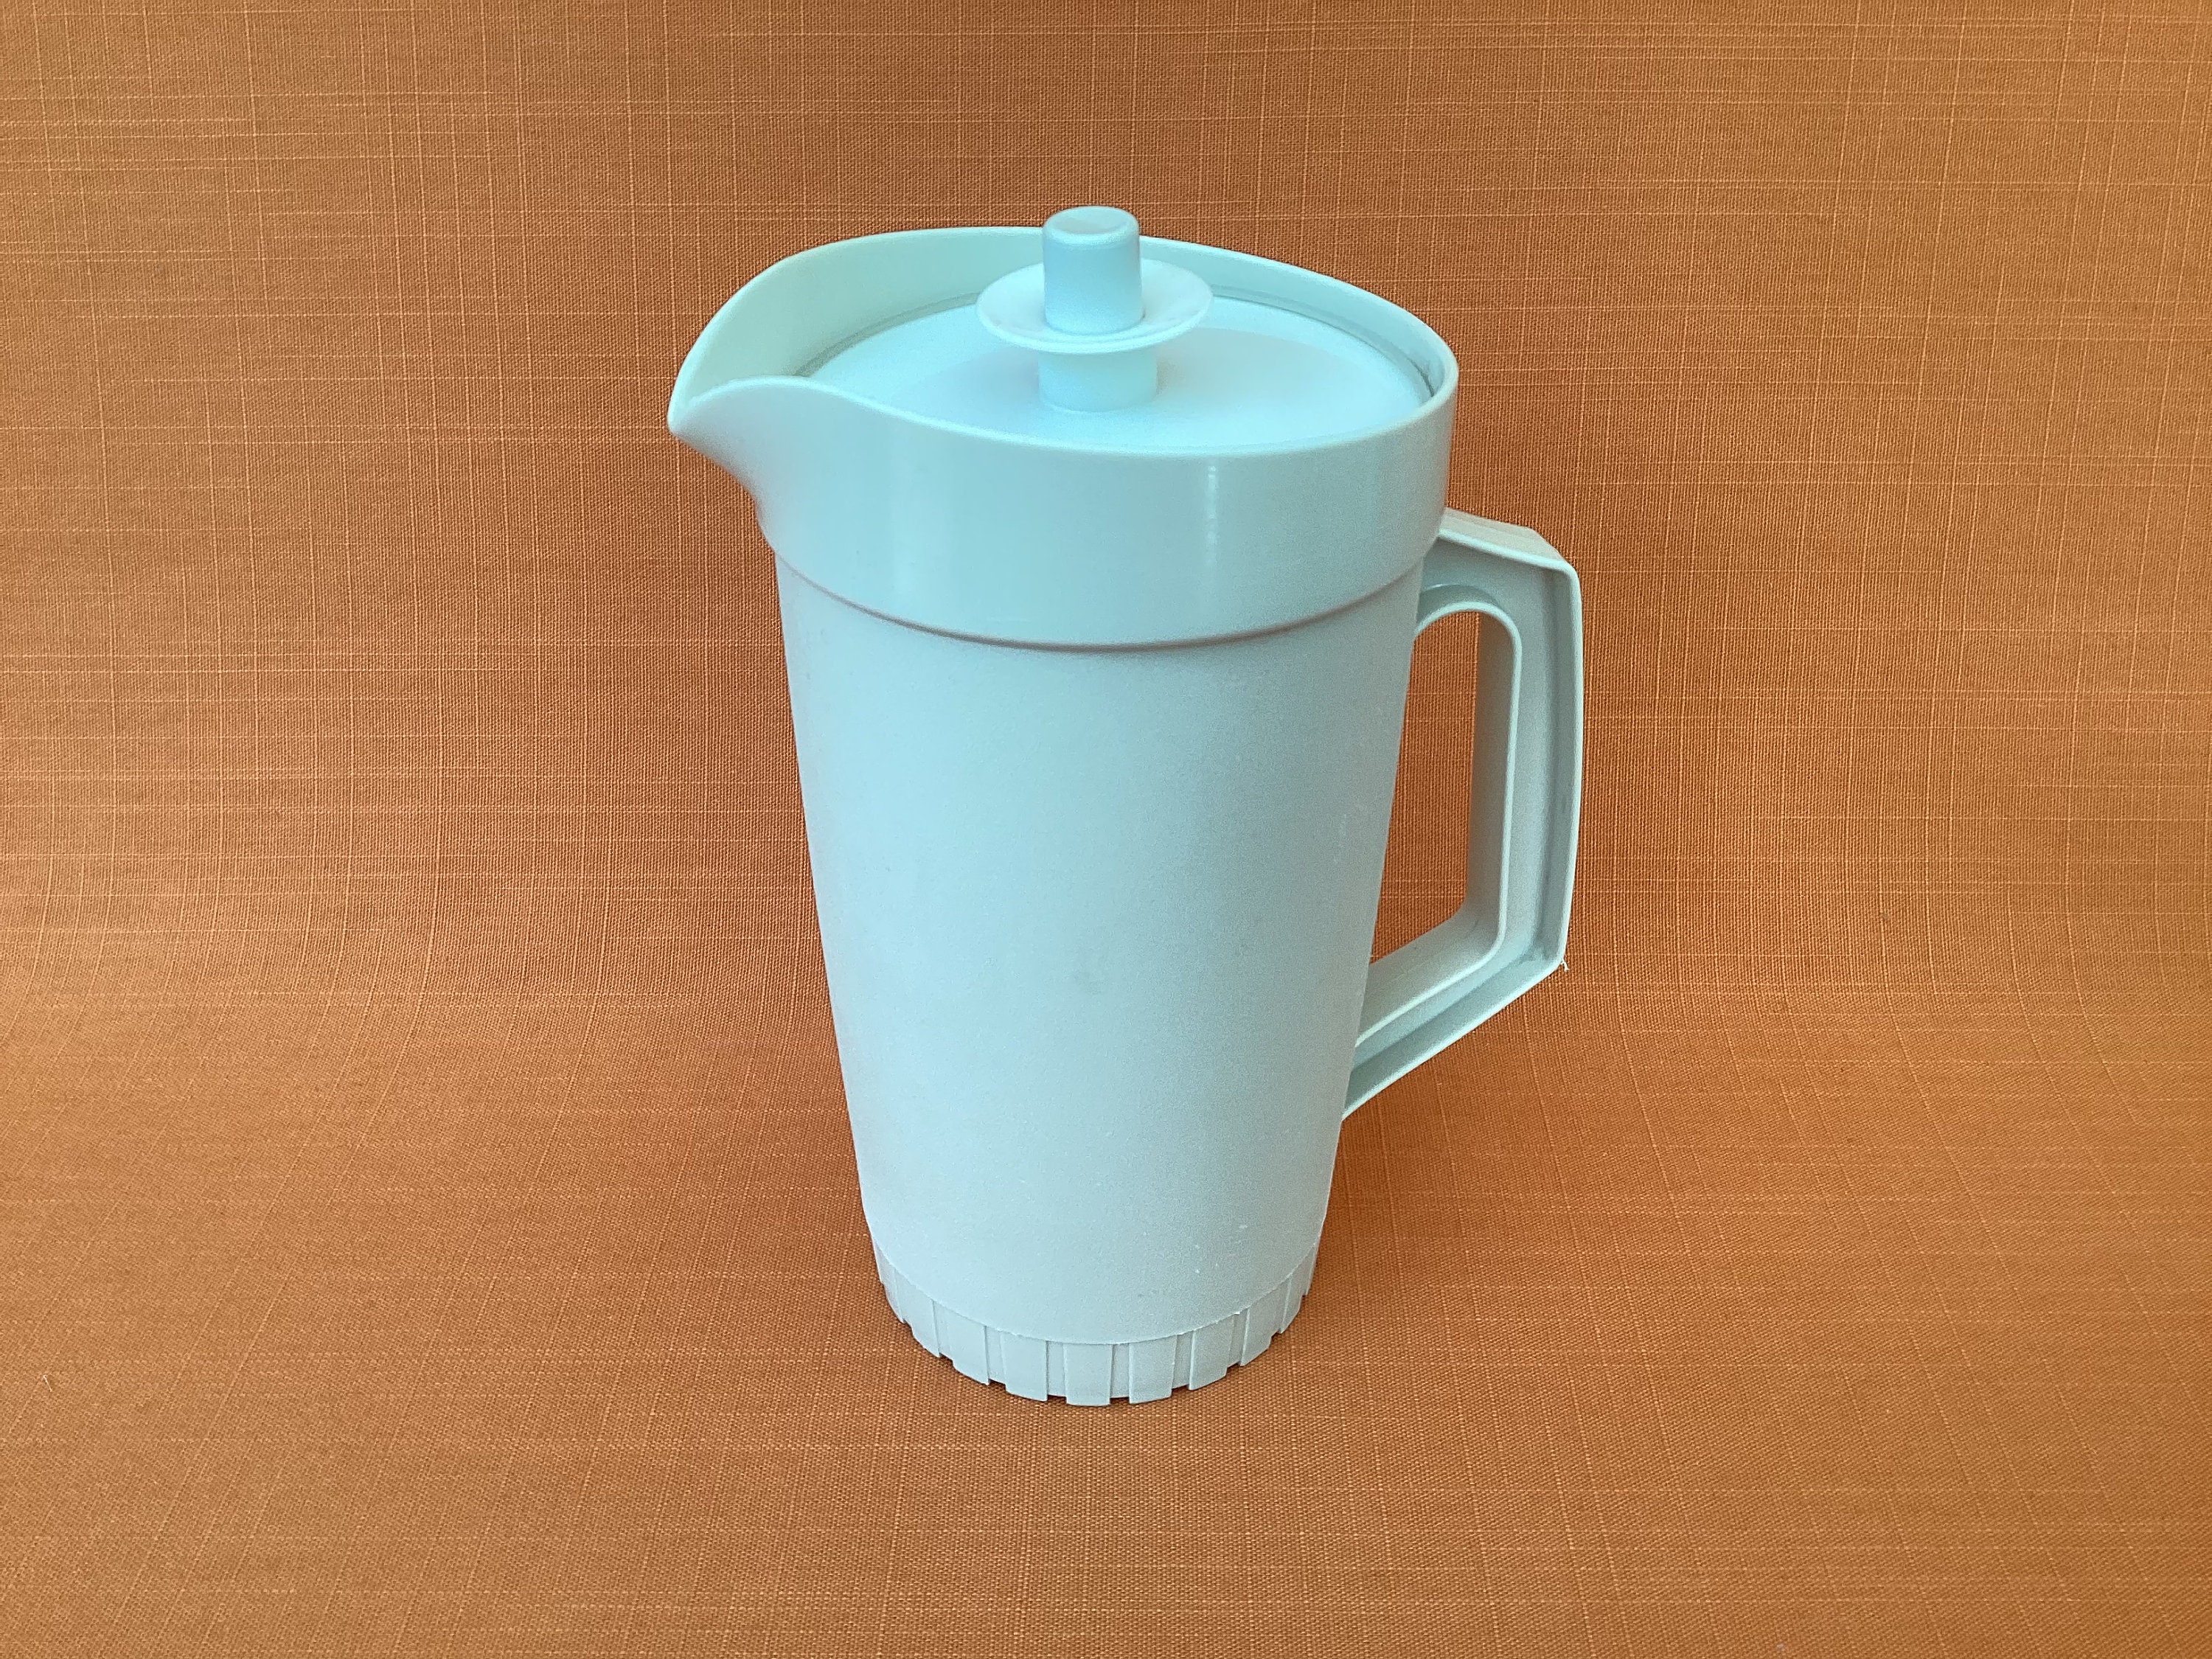 1960s Tupperware 2 Qt Juice Pitcher With Flip Top Lid Retro Vintage  Tupperware White Molded Plastic Beverage Pitcher RV Motor Home 